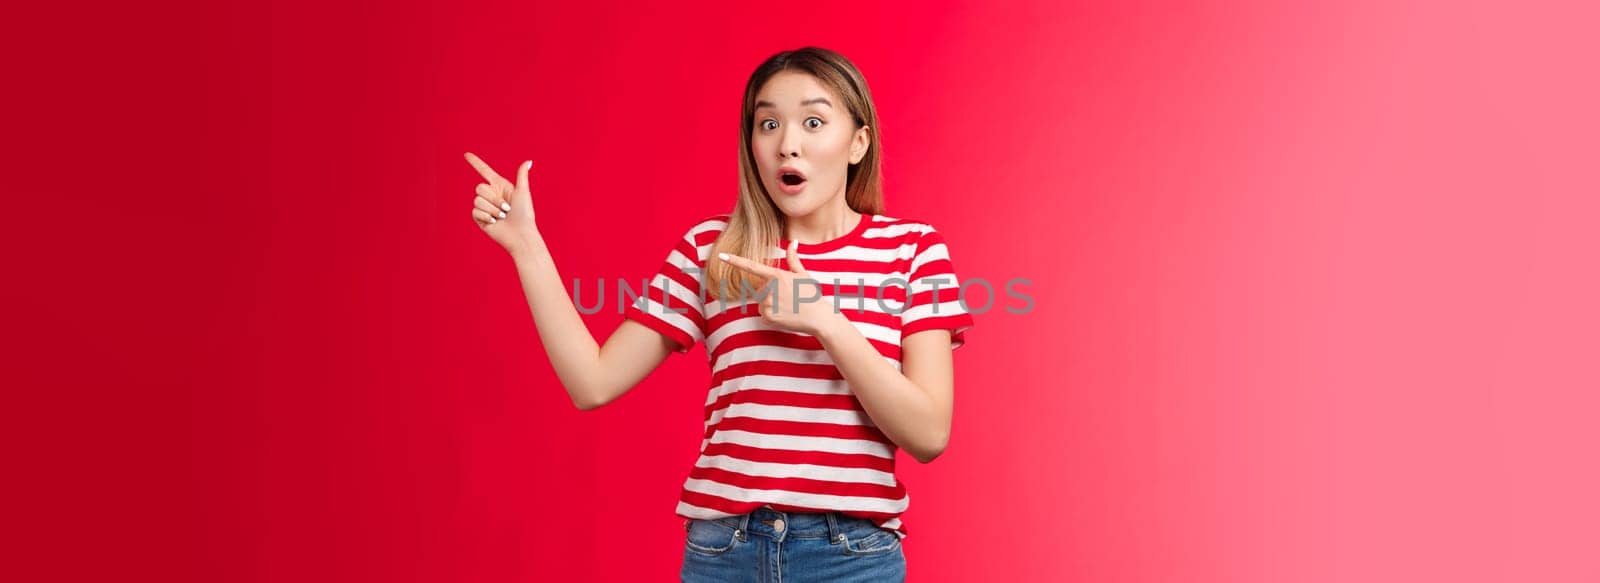 Surprised impressed attractive modern asian girl blond haircut open mouth gasping astonished, pointing right, show fingers impressive stunning promo new clothes collection look camera enthusiastic.